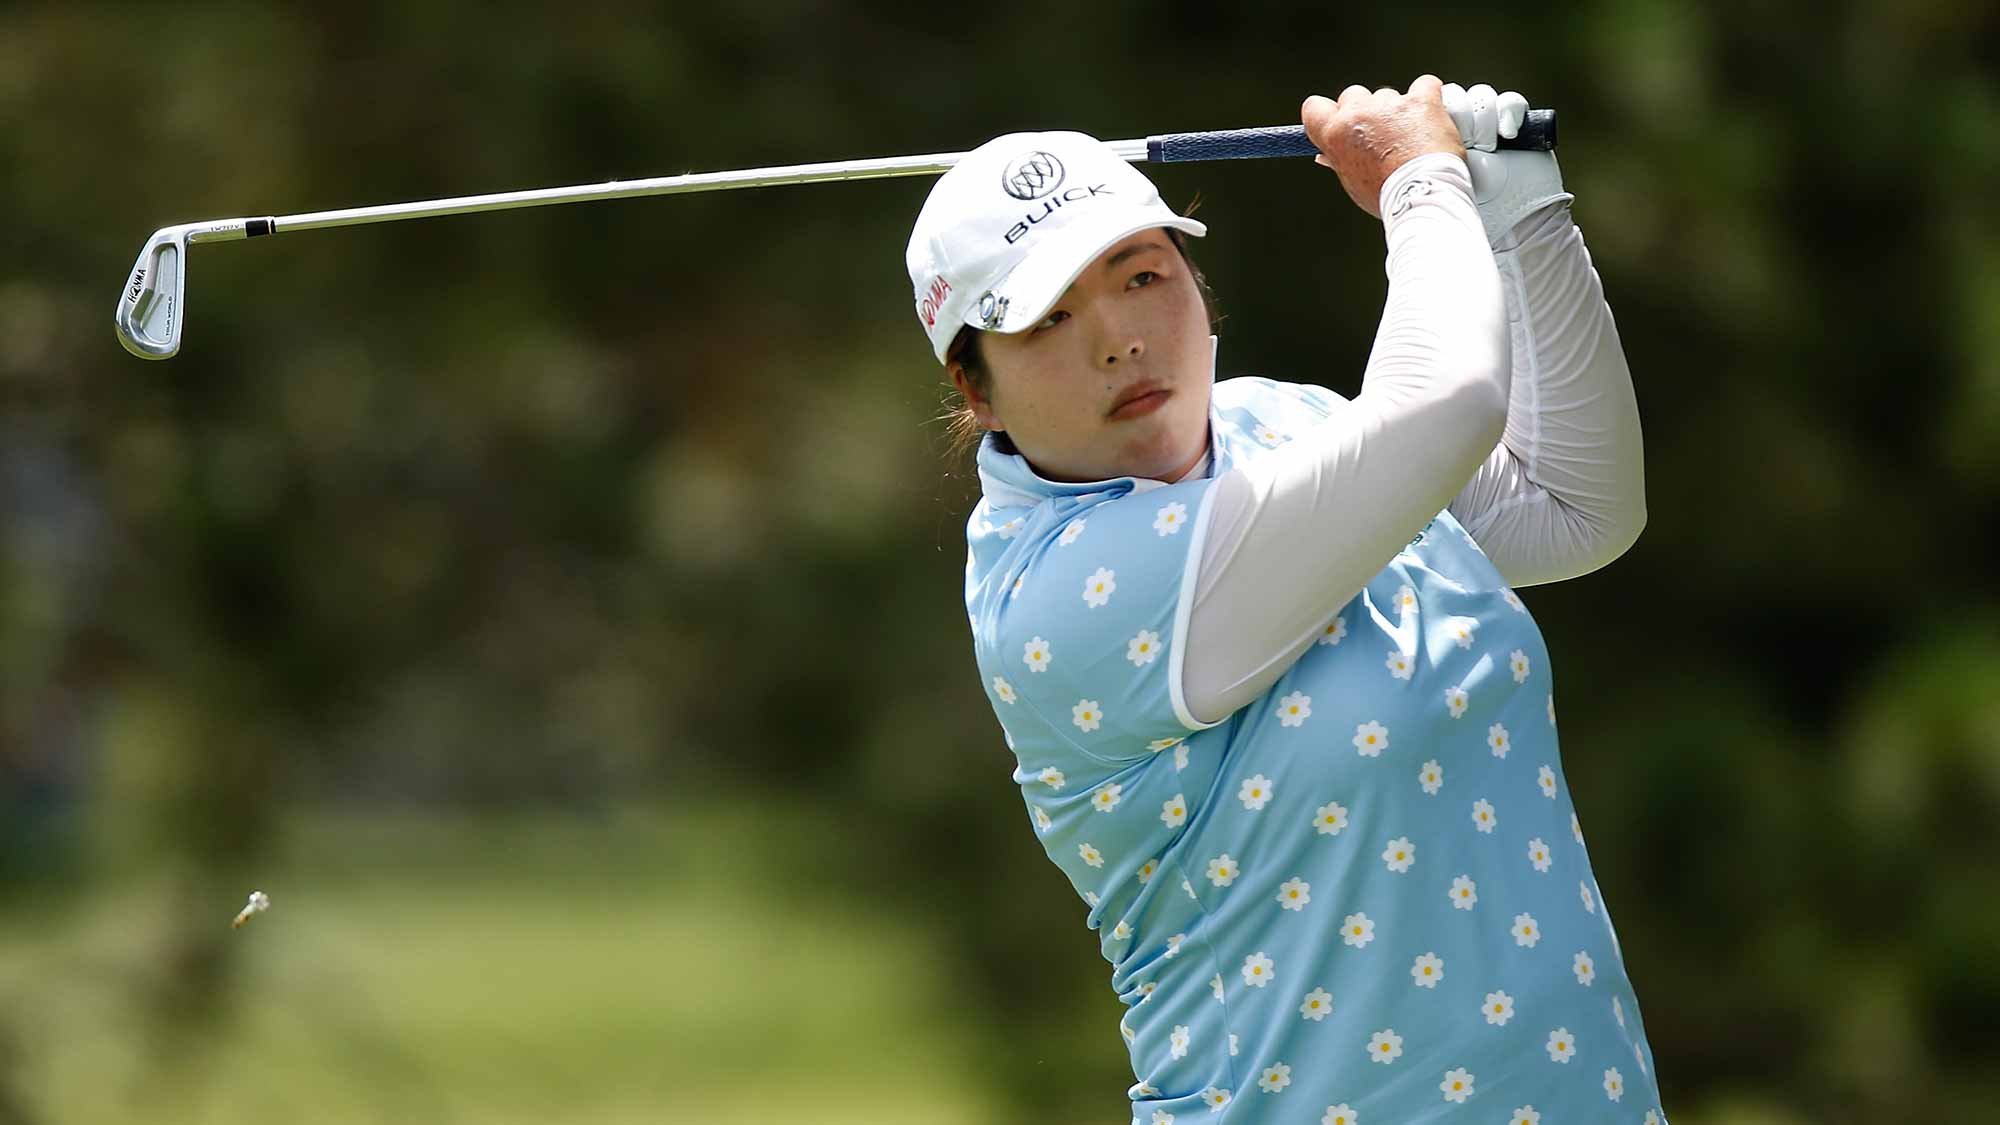 Shanshan Feng of China watches her tee shot on the second hole during the third round of the Marathon Classic presented by Owens Corning and O-I at Highland Meadows Golf Club